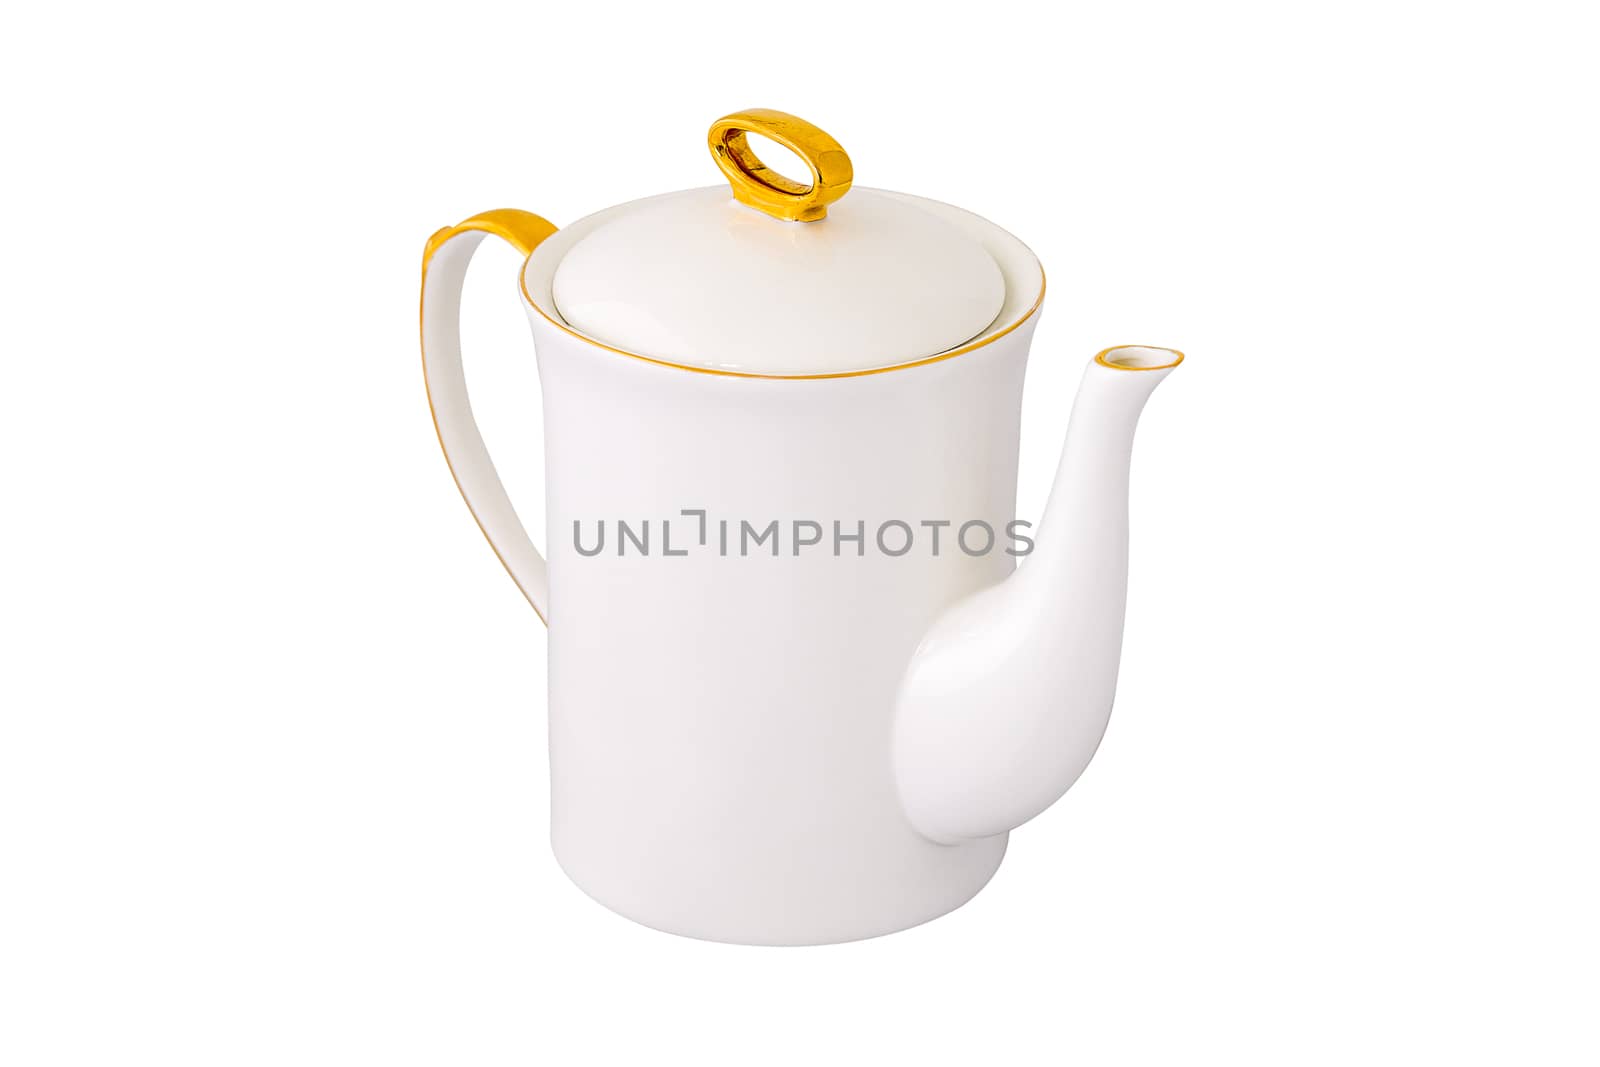 Teapot or Tea Pot Made with Ceramic Isolated on White Background